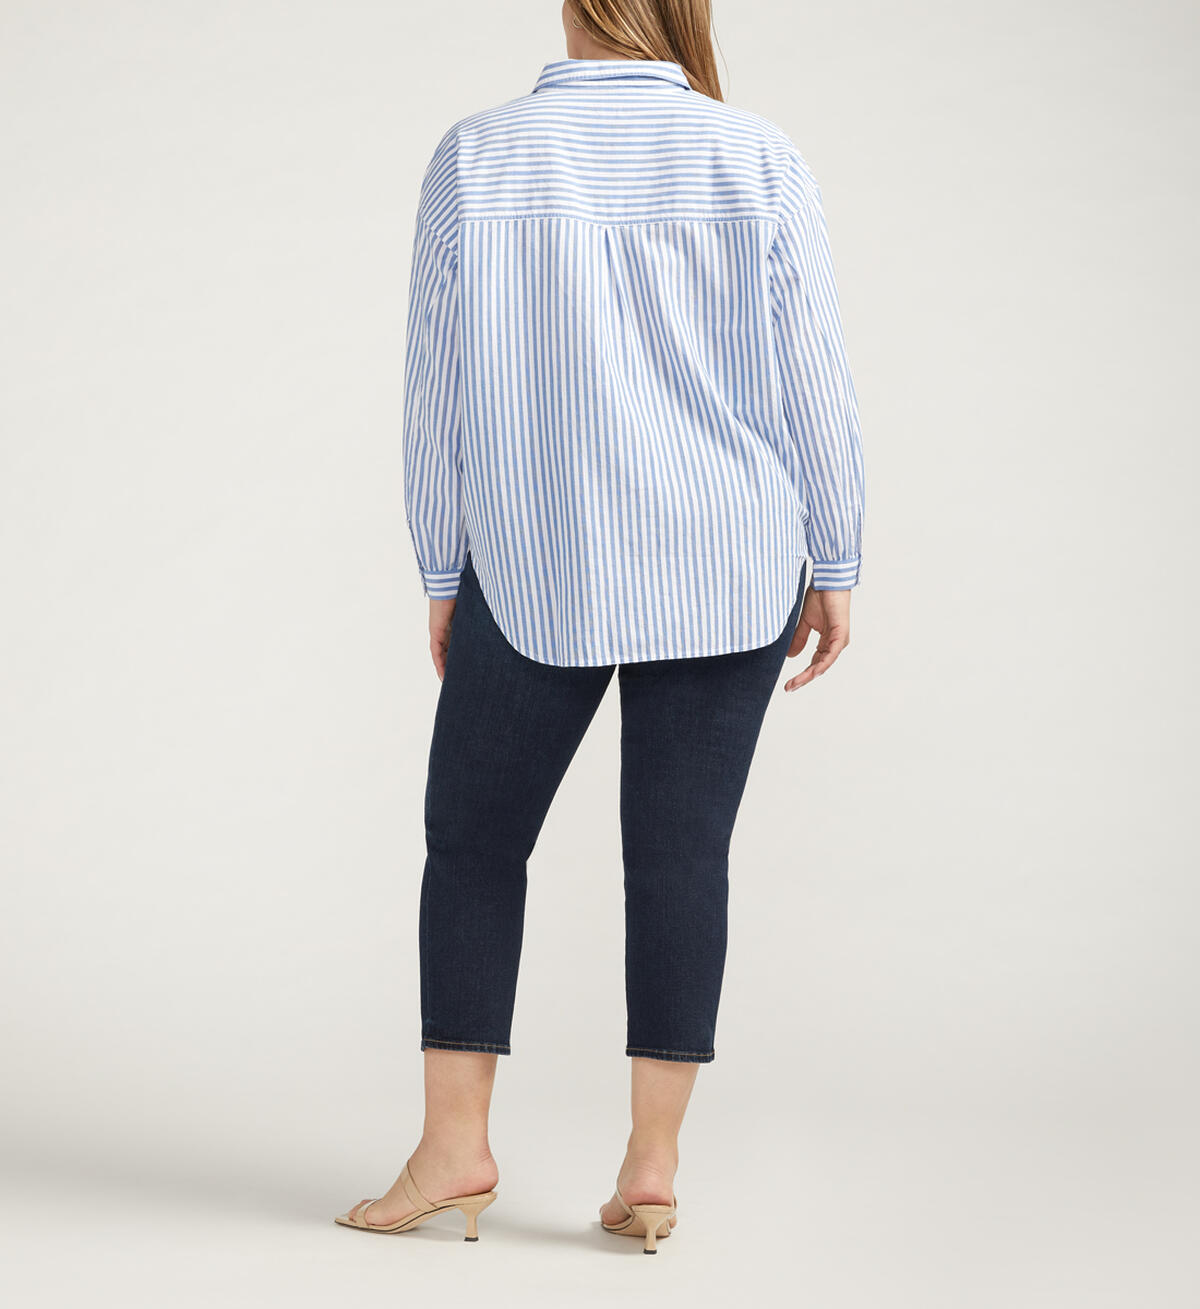 Relaxed Button-Down Shirt, , hi-res image number 1